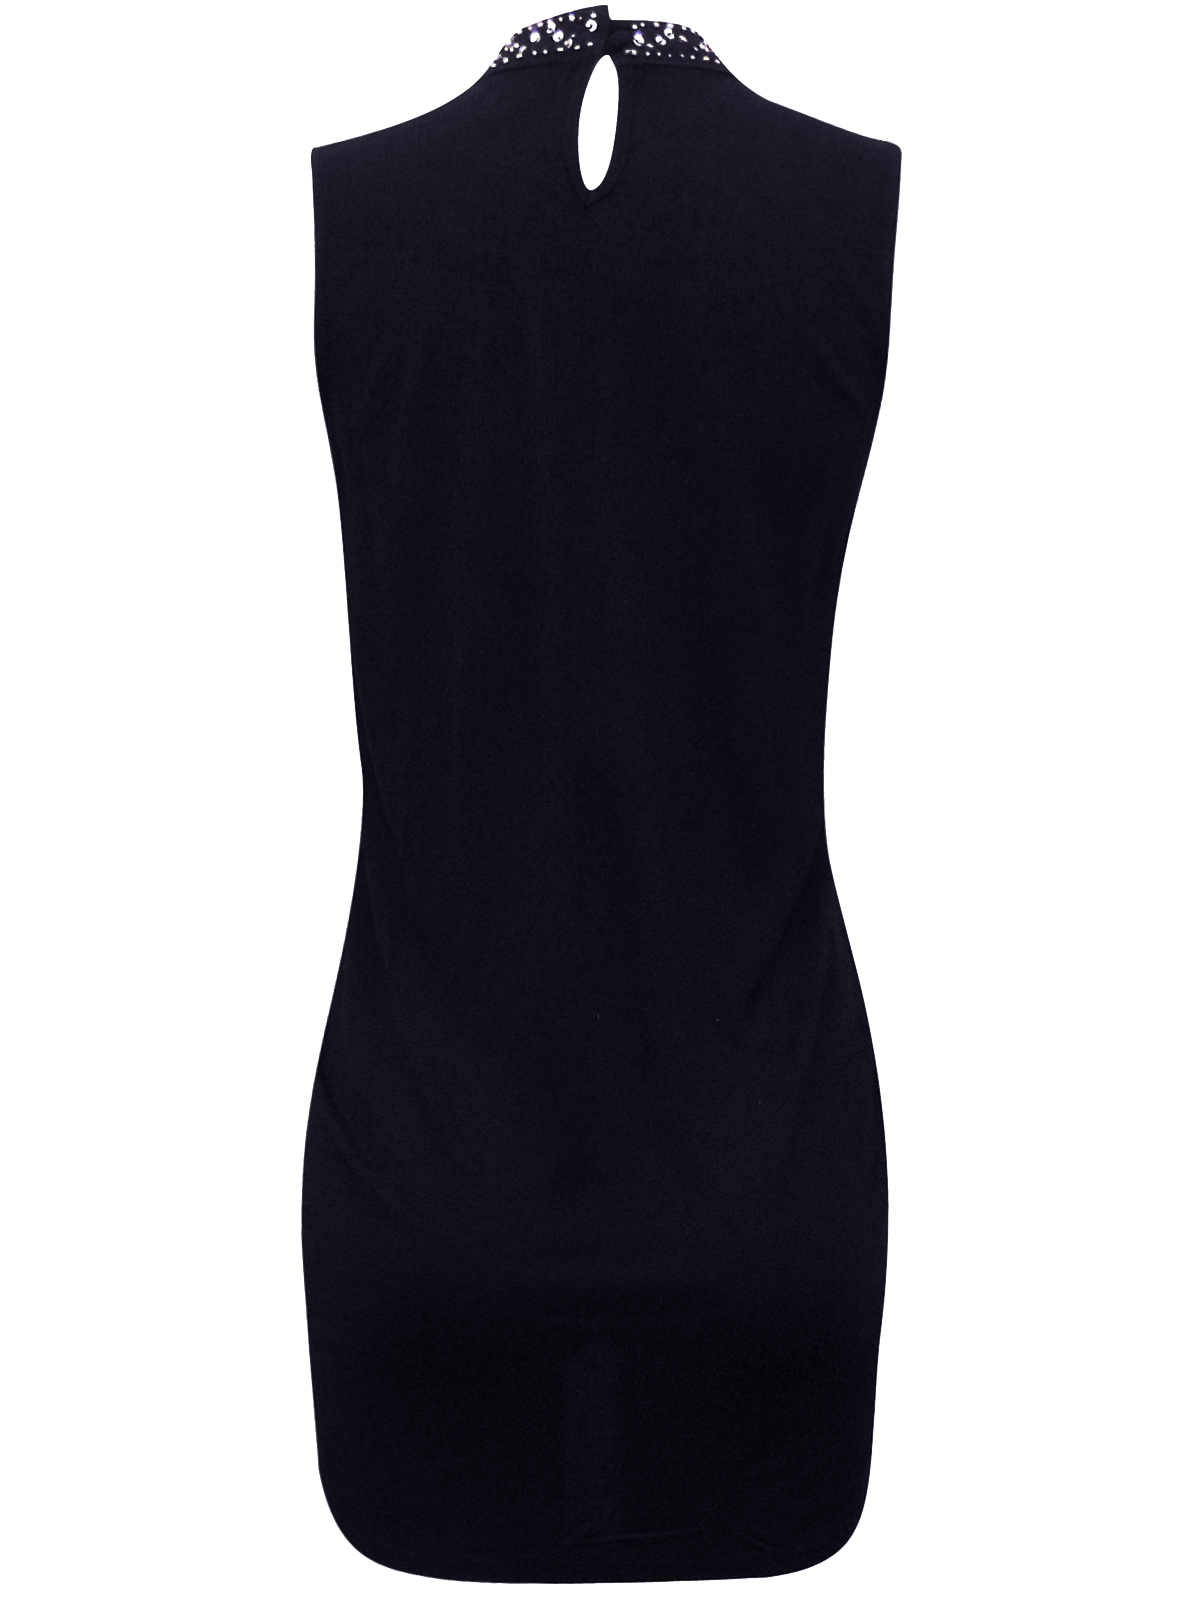 BLACK High Neck Embellished Tunic Top - Size 6 to 26